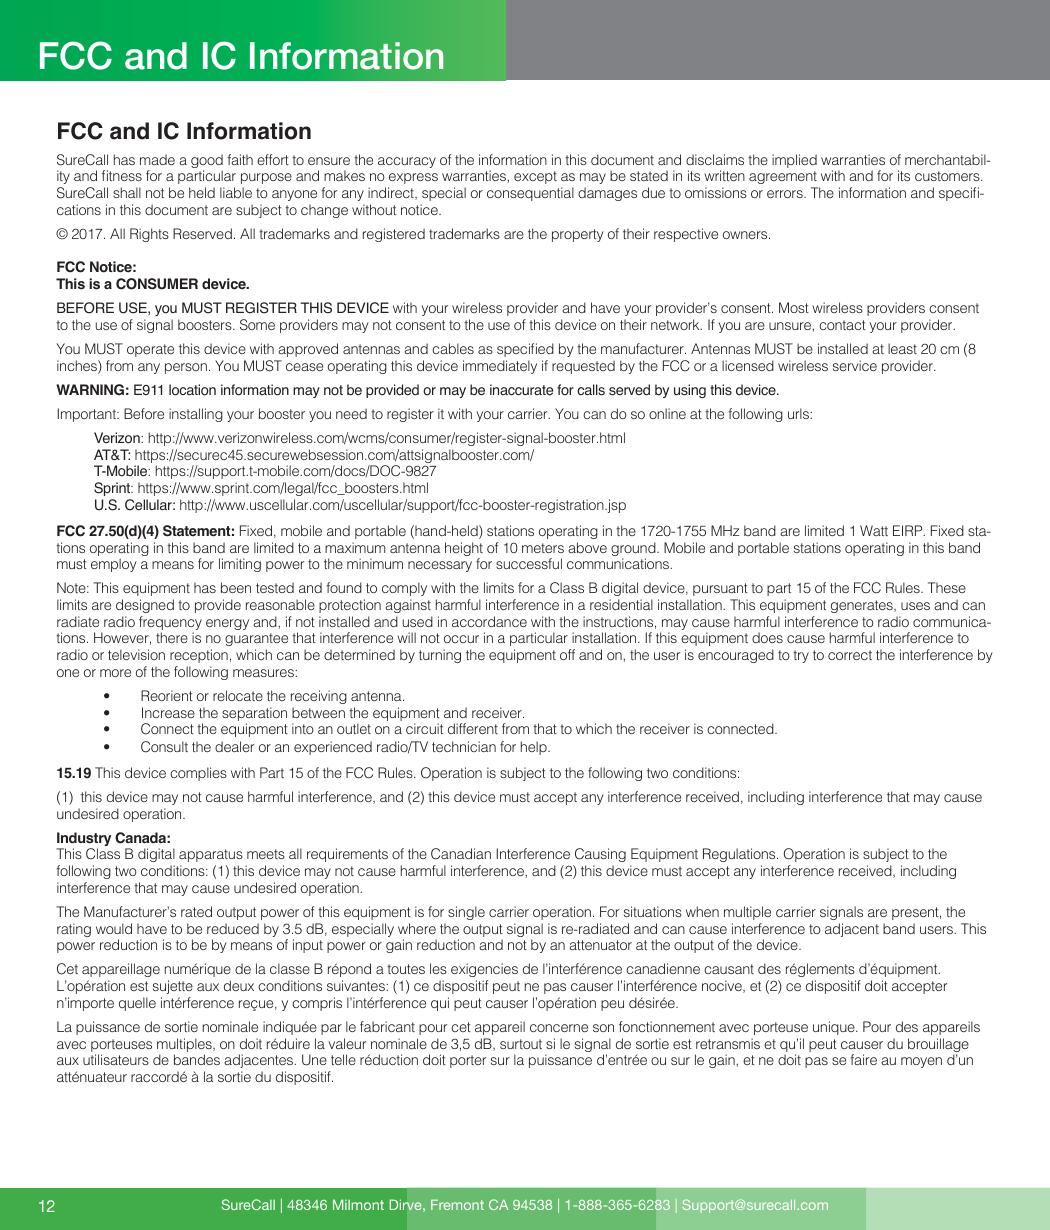 SureCall | 48346 Milmont Dirve, Fremont CA 94538 | 1-888-365-6283 | Support@surecall.comFCC and IC InformationSureCall has made a good faith effort to ensure the accuracy of the information in this document and disclaims the implied warranties of merchantabil-ity and tness for a particular purpose and makes no express warranties, except as may be stated in its written agreement with and for its customers. SureCall shall not be held liable to anyone for any indirect, special or consequential damages due to omissions or errors. The information and speci-cations in this document are subject to change without notice. © 2017. All Rights Reserved. All trademarks and registered trademarks are the property of their respective owners.FCC Notice:This is a CONSUMER device.BEFORE USE, you MUST REGISTER THIS DEVICE with your wireless provider and have your provider’s consent. Most wireless providers consent to the use of signal boosters. Some providers may not consent to the use of this device on their network. If you are unsure, contact your provider. You MUST operate this device with approved antennas and cables as specied by the manufacturer. Antennas MUST be installed at least 20 cm (8 inches) from any person. You MUST cease operating this device immediately if requested by the FCC or a licensed wireless service provider.WARNING: E911 location information may not be provided or may be inaccurate for calls served by using this device.Important: Before installing your booster you need to register it with your carrier. You can do so online at the following urls:Verizon: http://www.verizonwireless.com/wcms/consumer/register-signal-booster.htmlAT&amp;T: https://securec45.securewebsession.com/attsignalbooster.com/T-Mobile: https://support.t-mobile.com/docs/DOC-9827 Sprint: https://www.sprint.com/legal/fcc_boosters.htmlU.S. Cellular: http://www.uscellular.com/uscellular/support/fcc-booster-registration.jspFCC 27.50(d)(4) Statement: Fixed, mobile and portable (hand-held) stations operating in the 1720-1755 MHz band are limited 1 Watt EIRP. Fixed sta-tions operating in this band are limited to a maximum antenna height of 10 meters above ground. Mobile and portable stations operating in this band must employ a means for limiting power to the minimum necessary for successful communications.Note: This equipment has been tested and found to comply with the limits for a Class B digital device, pursuant to part 15 of the FCC Rules. These limits are designed to provide reasonable protection against harmful interference in a residential installation. This equipment generates, uses and can radiate radio frequency energy and, if not installed and used in accordance with the instructions, may cause harmful interference to radio communica-tions. However, there is no guarantee that interference will not occur in a particular installation. If this equipment does cause harmful interference to radio or television reception, which can be determined by turning the equipment off and on, the user is encouraged to try to correct the interference by one or more of the following measures: •  Reorient or relocate the receiving antenna.•  Increase the separation between the equipment and receiver.•  Connect the equipment into an outlet on a circuit different from that to which the receiver is connected.•  Consult the dealer or an experienced radio/TV technician for help.15.19 This device complies with Part 15 of the FCC Rules. Operation is subject to the following two conditions:  (1)  this device may not cause harmful interference, and (2) this device must accept any interference received, including interference that may cause undesired operation.Industry Canada: This Class B digital apparatus meets all requirements of the Canadian Interference Causing Equipment Regulations. Operation is subject to the following two conditions: (1) this device may not cause harmful interference, and (2) this device must accept any interference received, including interference that may cause undesired operation.The Manufacturer’s rated output power of this equipment is for single carrier operation. For situations when multiple carrier signals are present, the rating would have to be reduced by 3.5 dB, especially where the output signal is re-radiated and can cause interference to adjacent band users. This power reduction is to be by means of input power or gain reduction and not by an attenuator at the output of the device.Cet appareillage numérique de la classe B répond a toutes les exigencies de l’interférence canadienne causant des réglements d’équipment. L’opération est sujette aux deux conditions suivantes: (1) ce dispositif peut ne pas causer l’interférence nocive, et (2) ce dispositif doit accepter n’importe quelle intérference reçue, y compris l’intérference qui peut causer l’opération peu désirée.La puissance de sortie nominale indiquée par le fabricant pour cet appareil concerne son fonctionnement avec porteuse unique. Pour des appareils avec porteuses multiples, on doit réduire la valeur nominale de 3,5 dB, surtout si le signal de sortie est retransmis et qu’il peut causer du brouillage aux utilisateurs de bandes adjacentes. Une telle réduction doit porter sur la puissance d’entrée ou sur le gain, et ne doit pas se faire au moyen d’un atténuateur raccordé à la sortie du dispositif.12FCC and IC Information